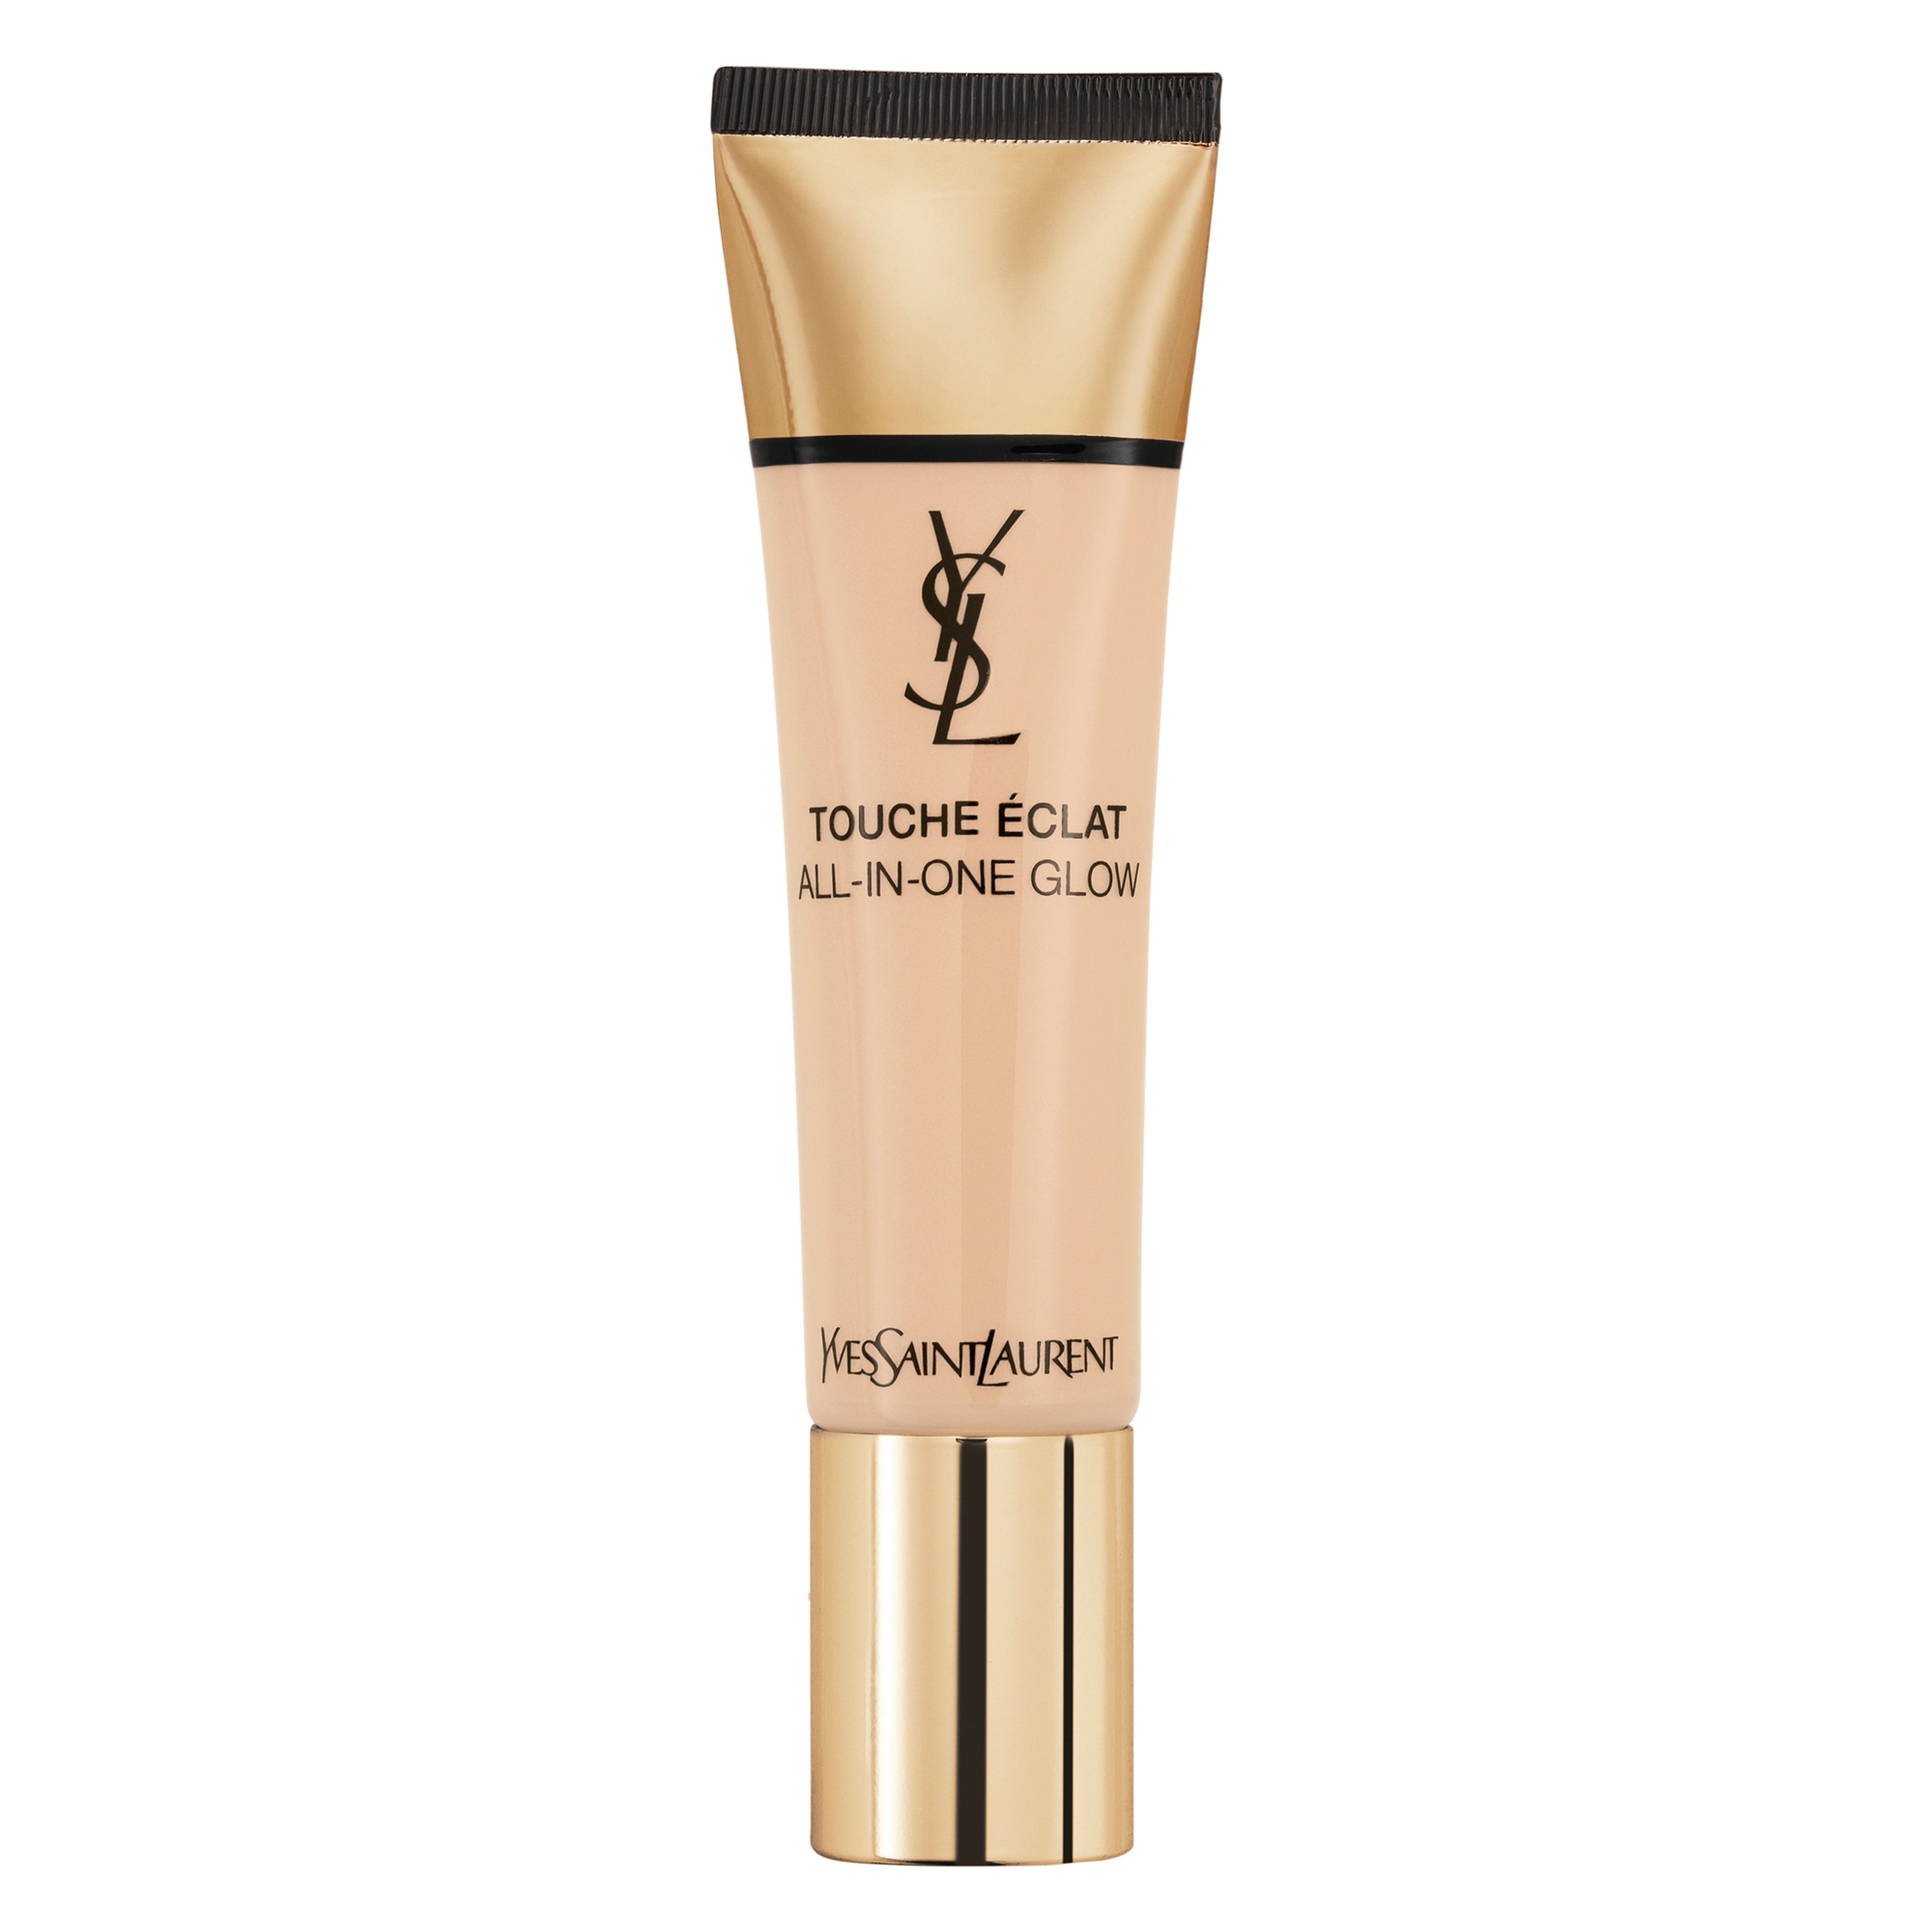 Yves Saint Laurent Touche Eclat All-in-one Glow 1